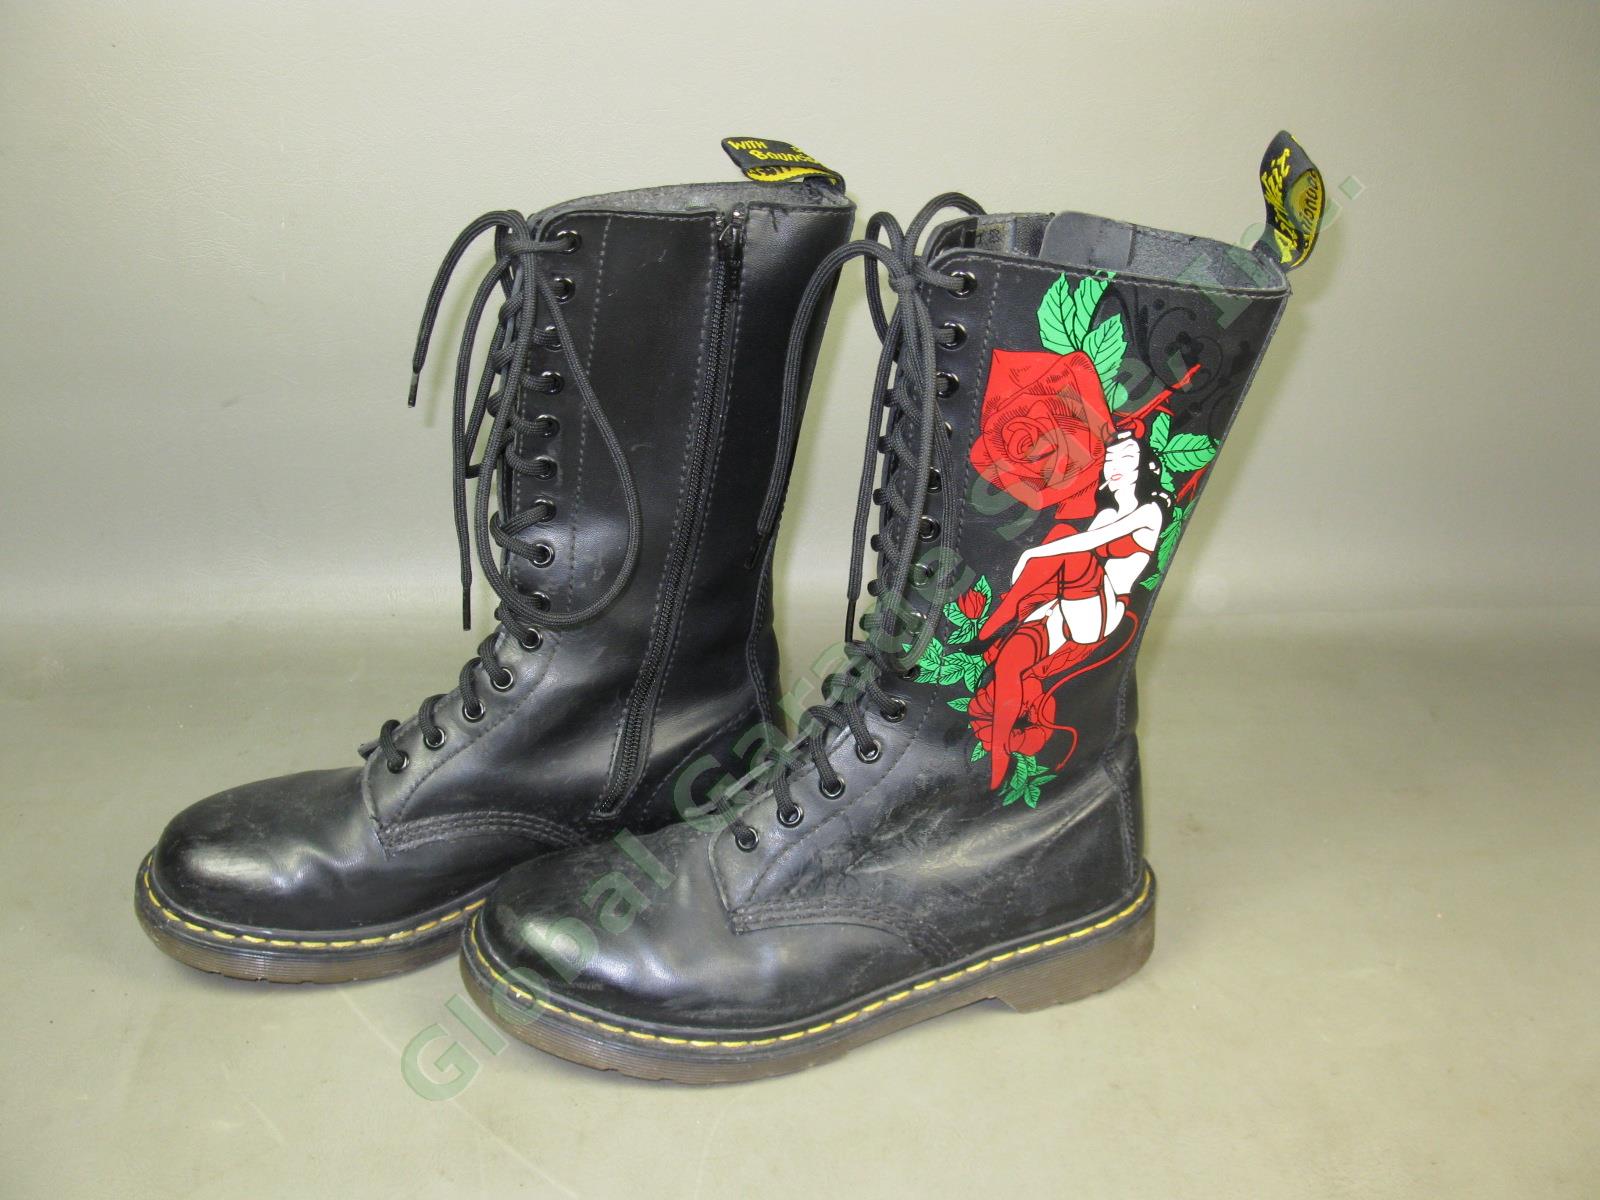 Dr Doc Martens Burlesque Rose Bouncing Air Cushion Sole 14-Eye Leather Boots 7 9